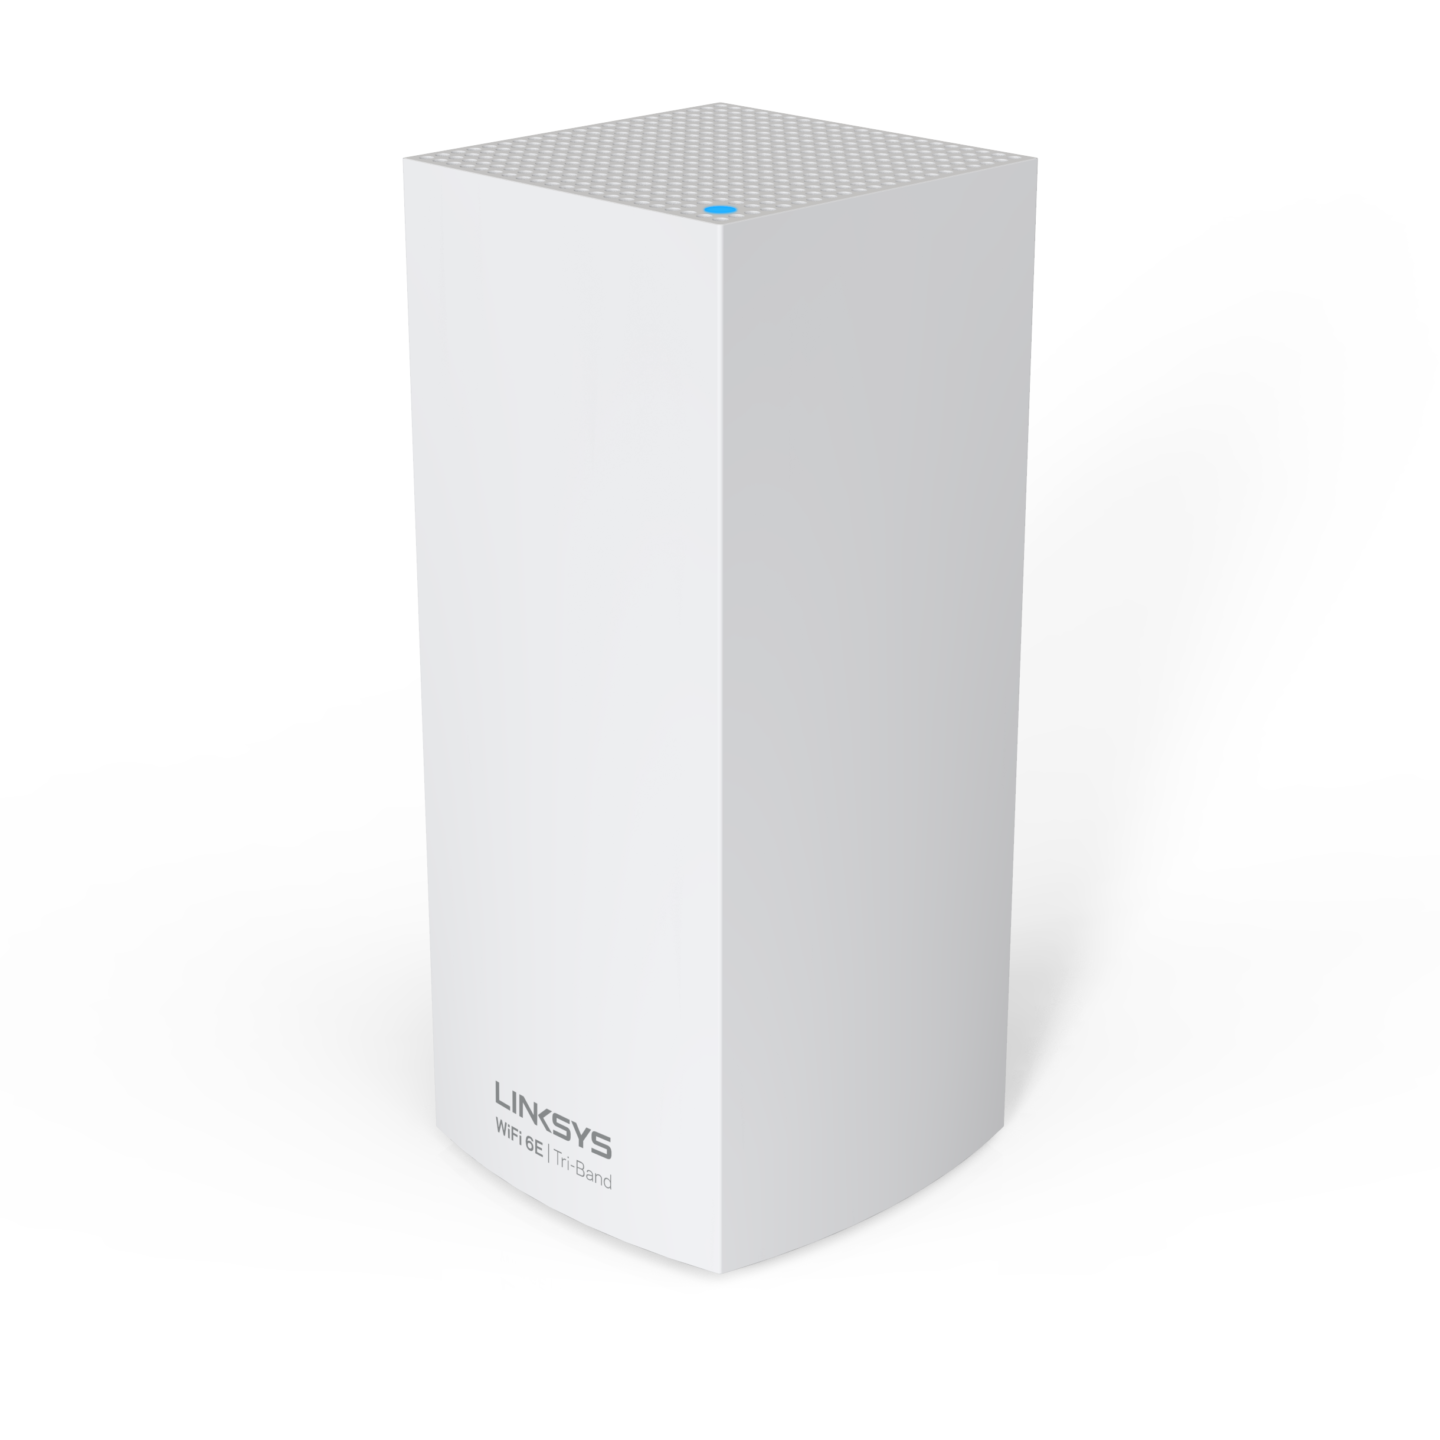 Linksys-AXE8400-front01-1440x1440.png